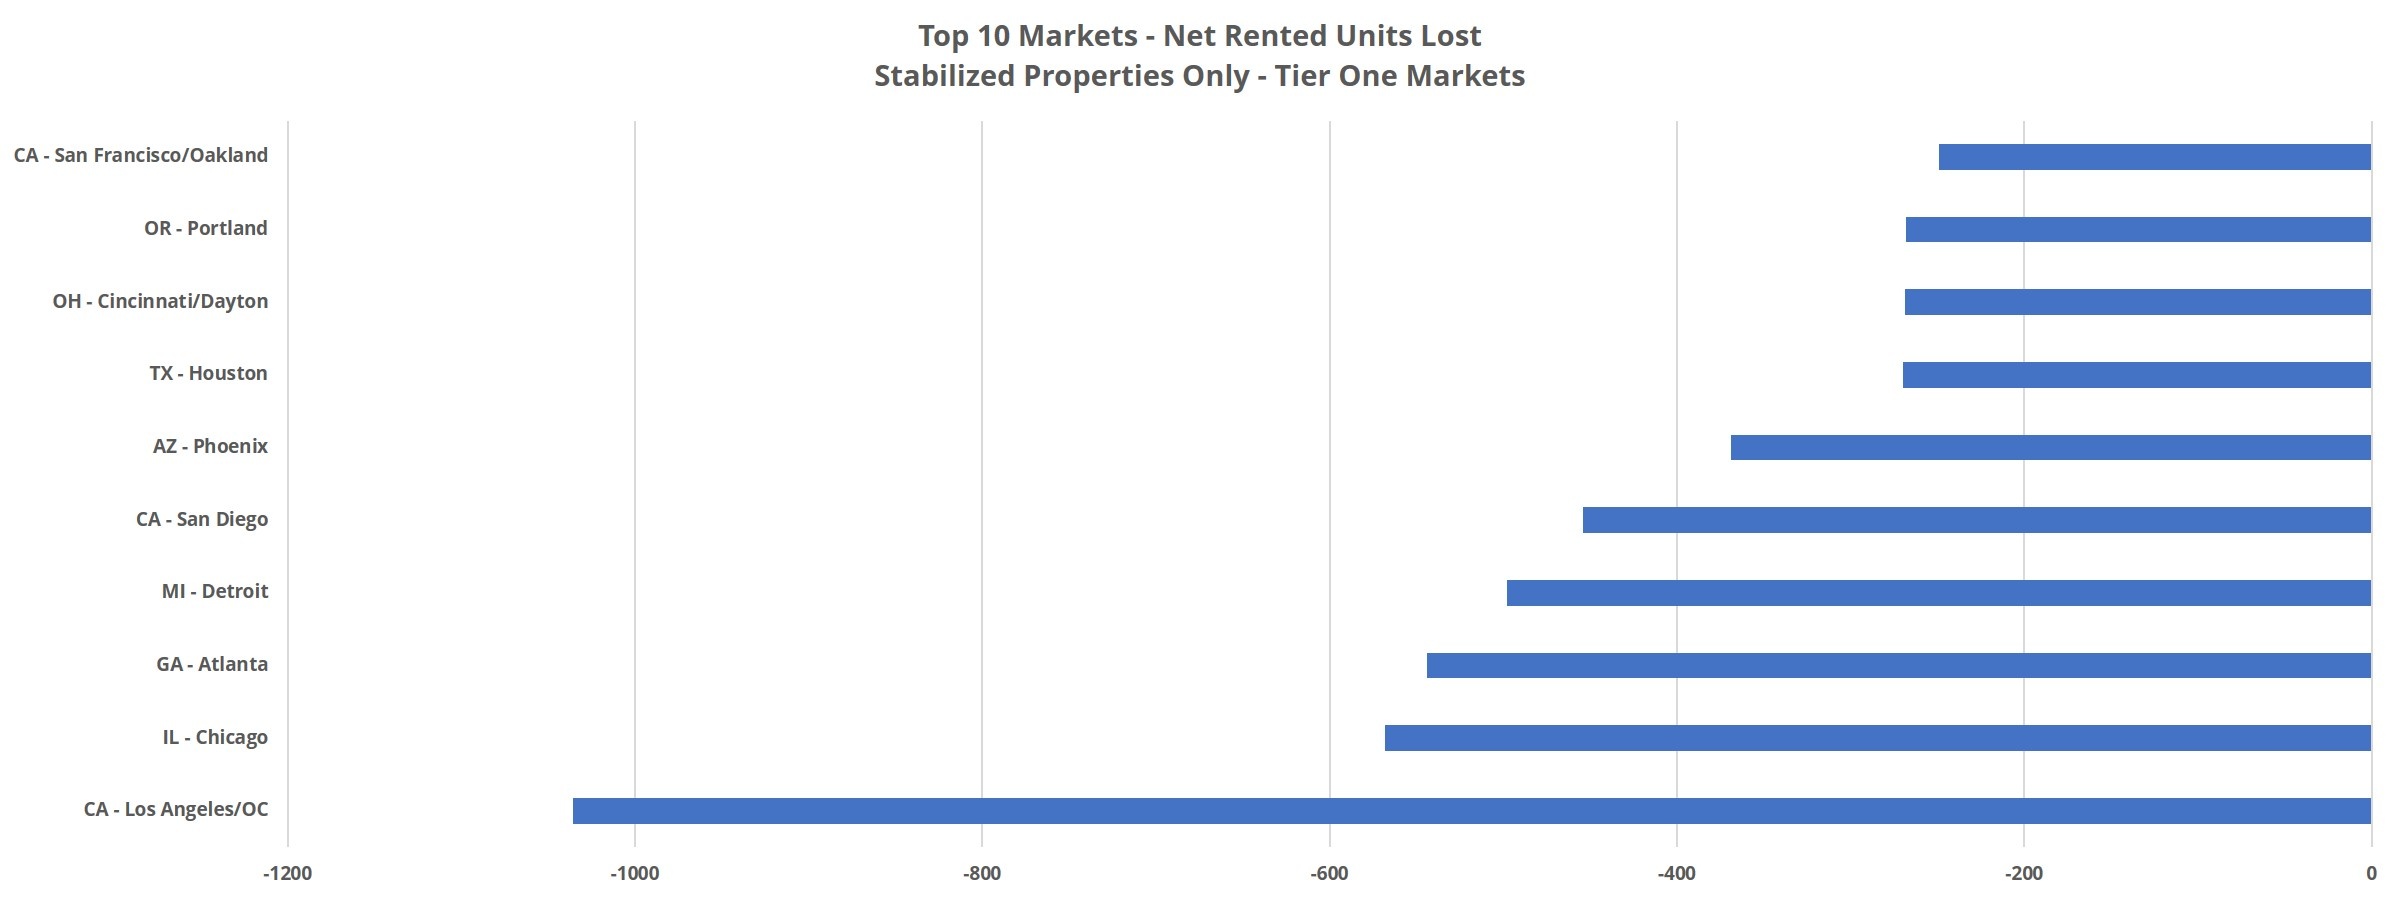 Top 10 Markets - Net Rented Units Lost Stabilized Properties Only - Tier One Markets